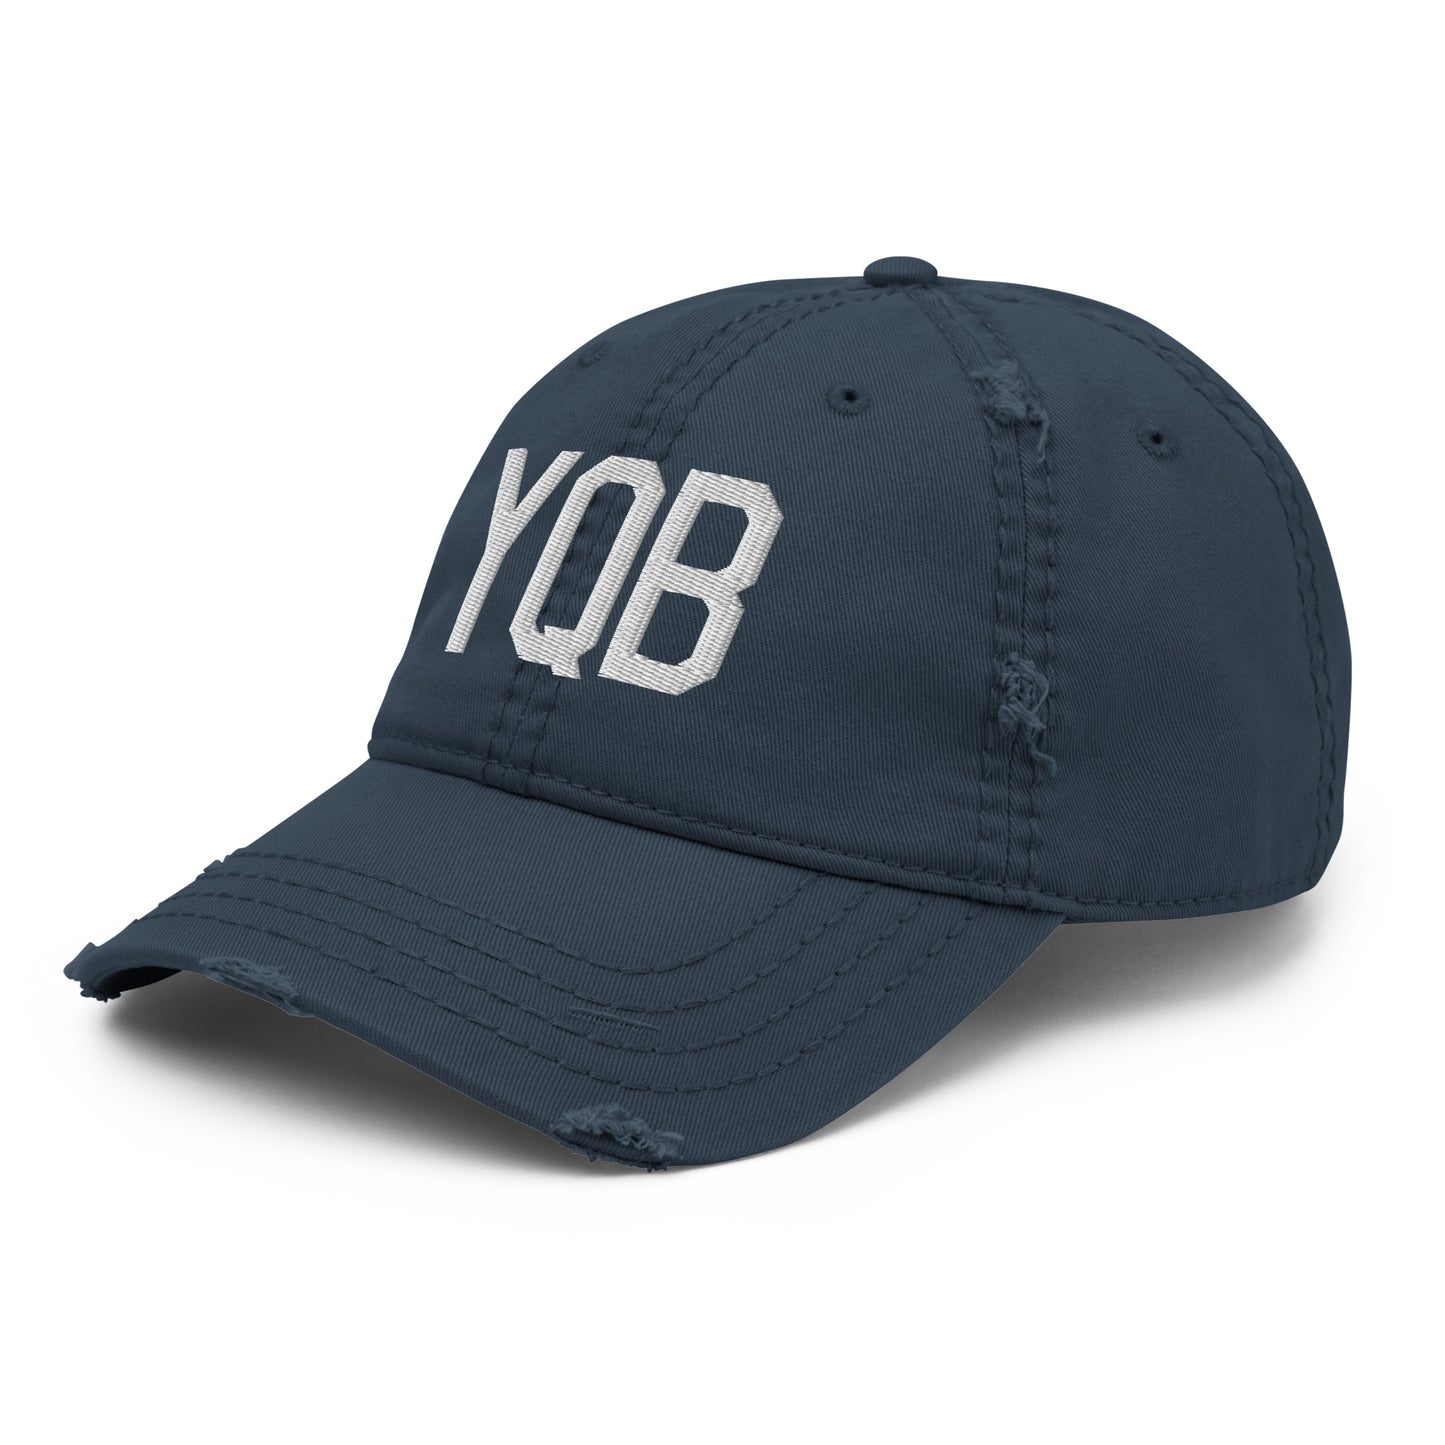 Airport Code Distressed Hat - White • YQB Quebec City • YHM Designs - Image 01